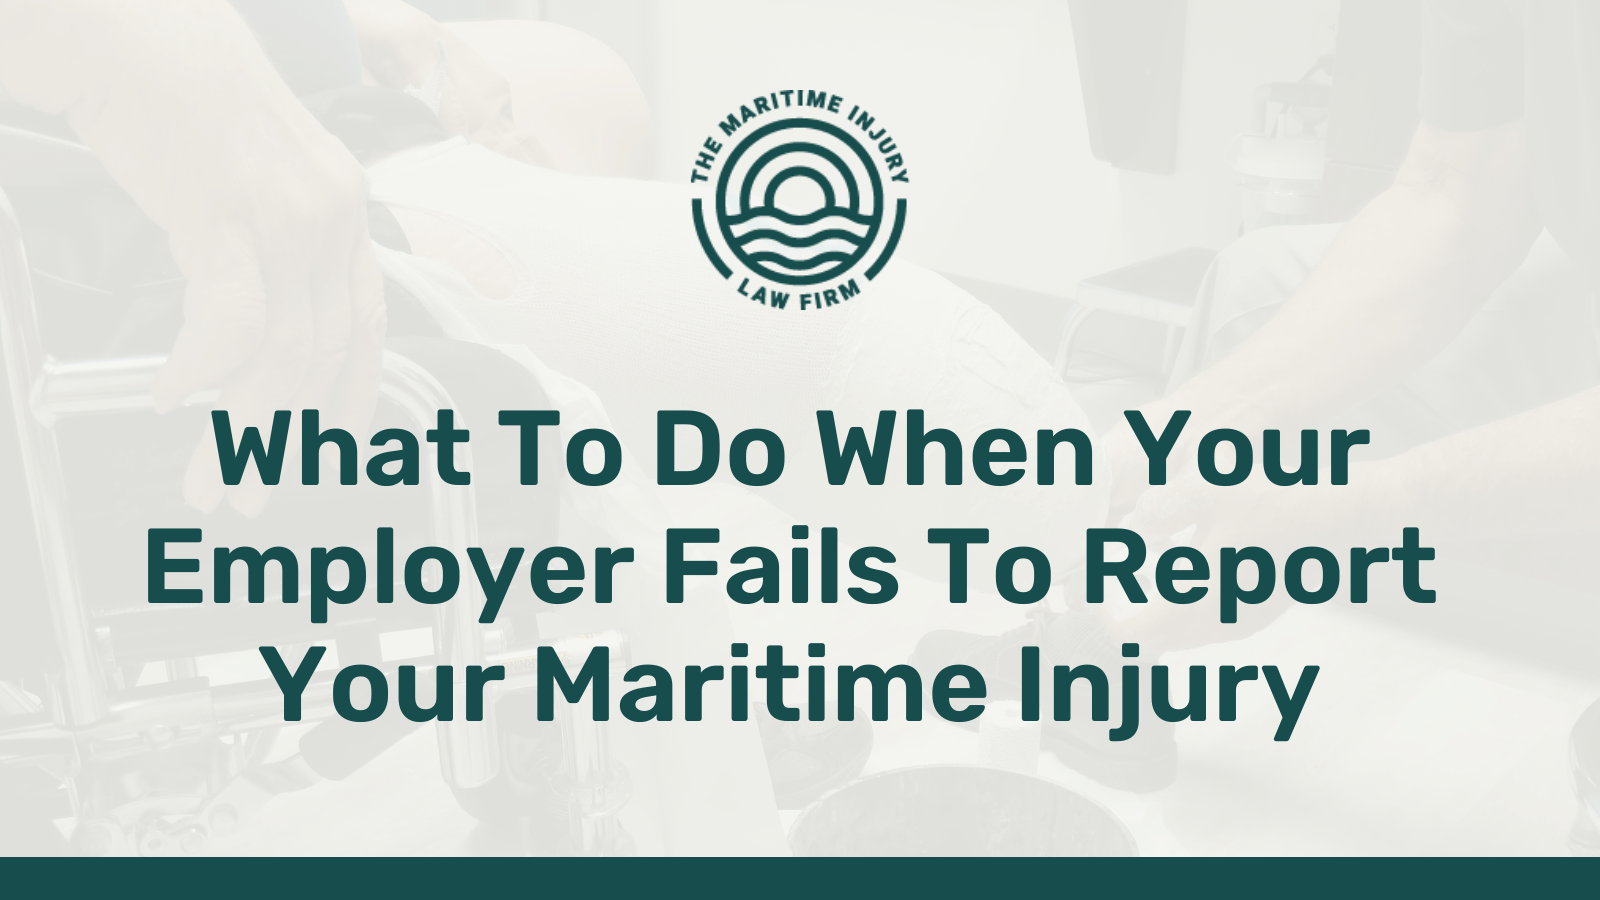 What To Do When Your Employer Fails To Report Your Maritime Injury - maritime injury law firm - George Vourvoulias